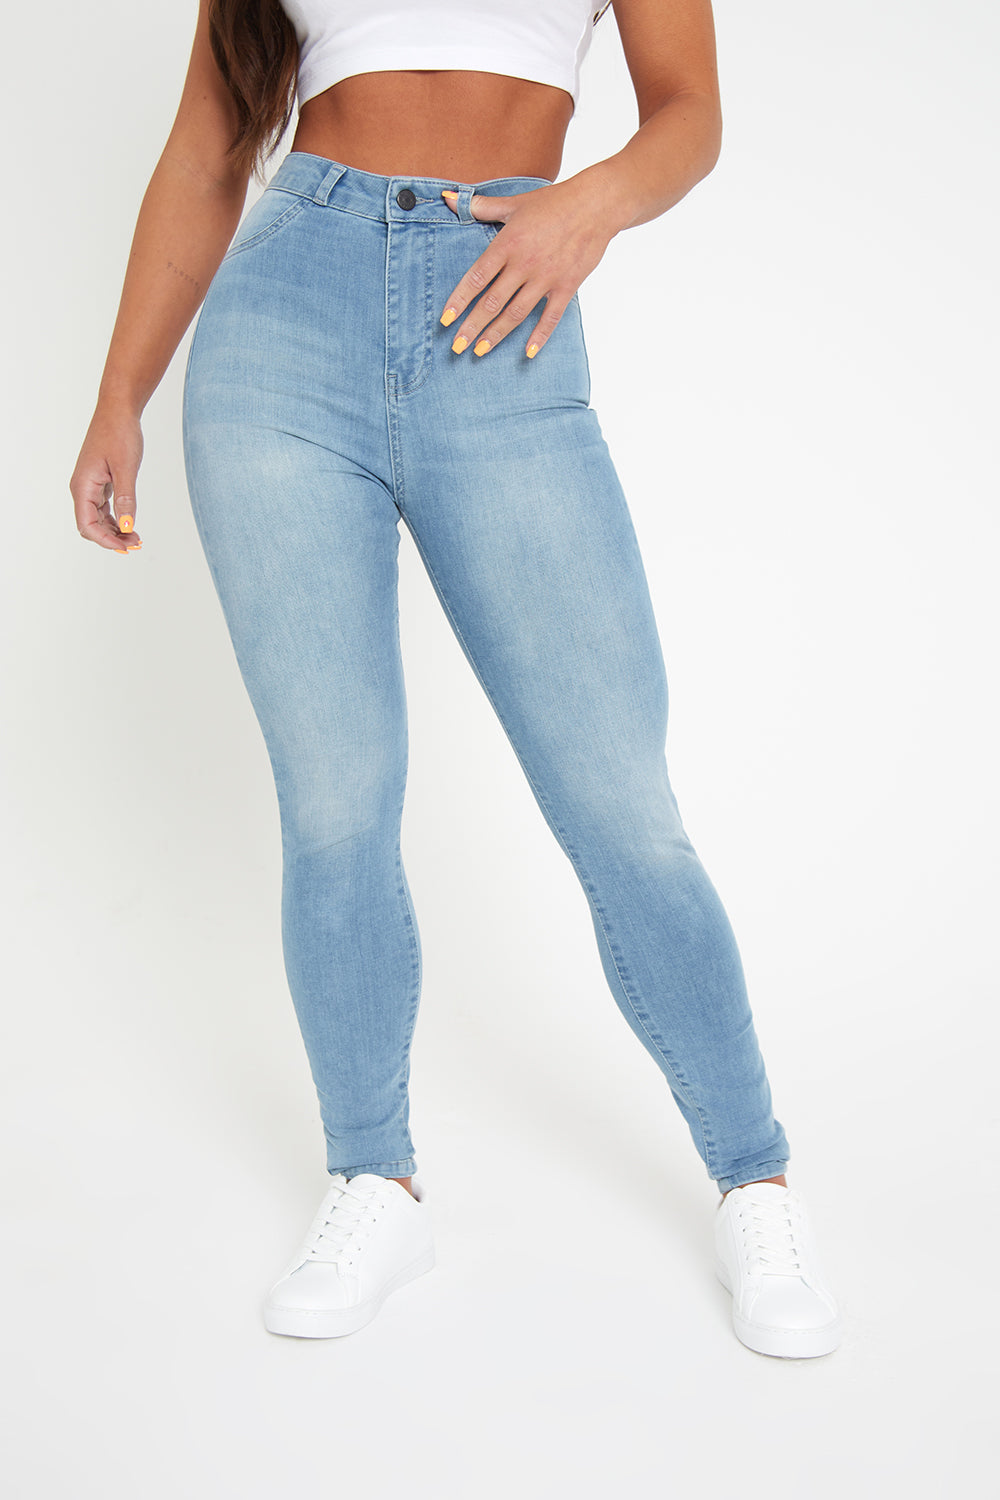 High Waist Black And Blue Skinny Jeans With 4 Pockets For Women